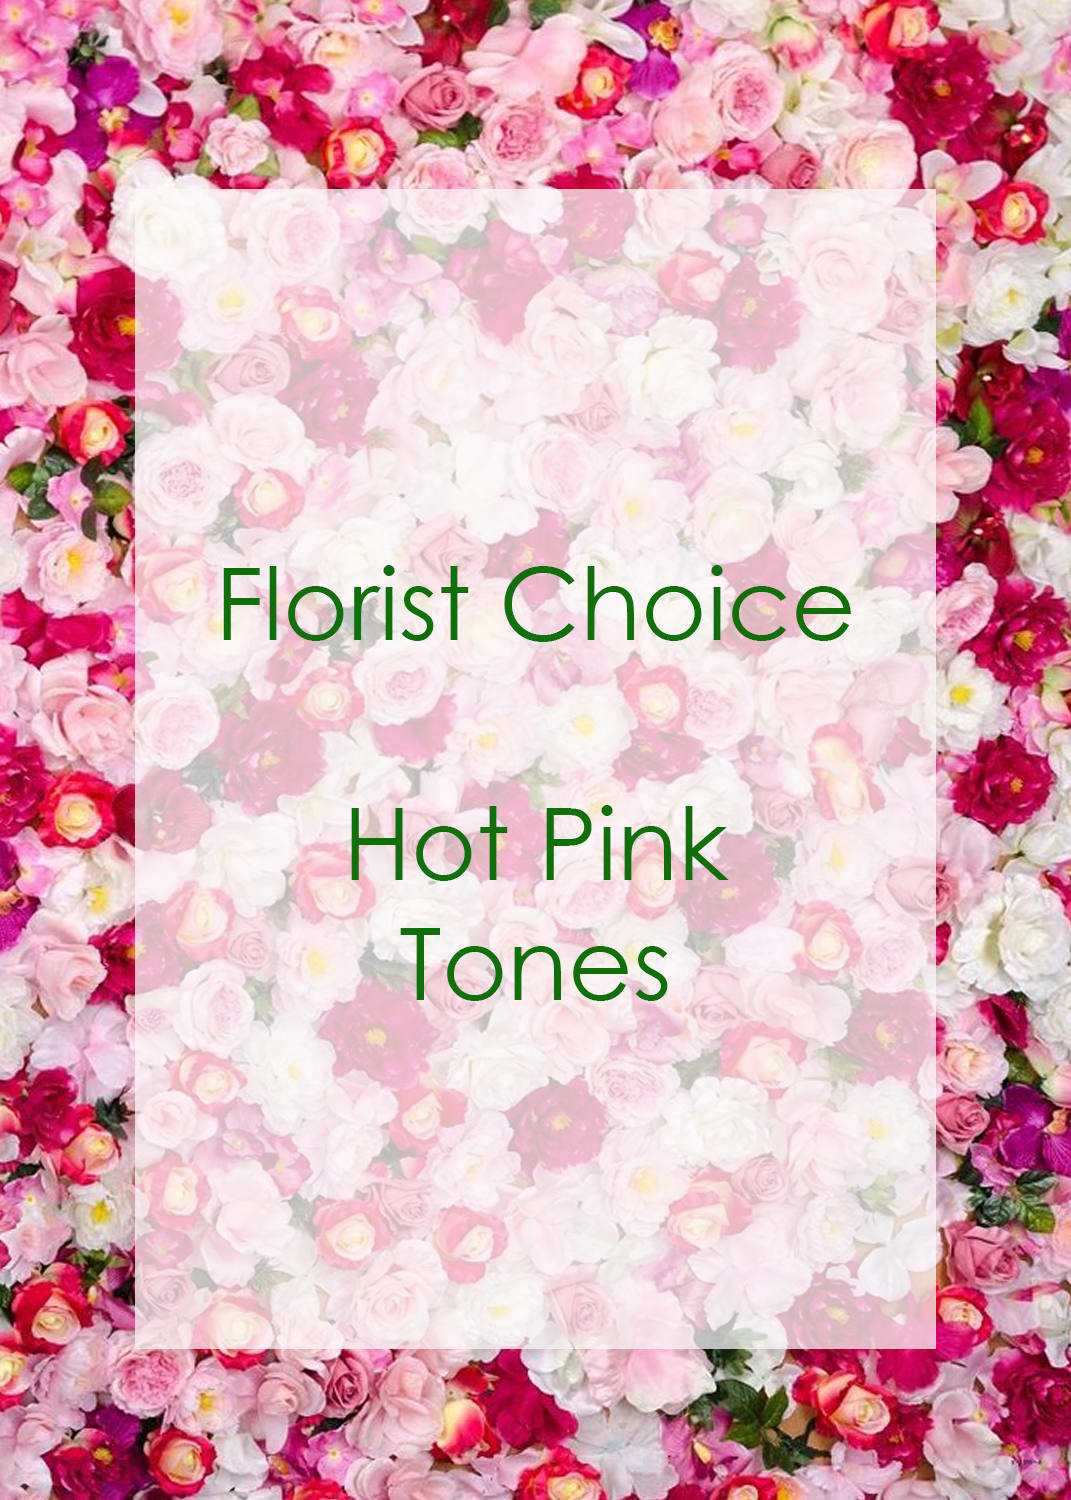 Florist Choice Hot Pink Tones - We will pick the most beautiful seasonal flowers in bright pink hues to create a gorgeous design, perfect for any occasion! This arrangement will be designed in a vase and created with primarily bright pink colors, with other complimentary colors to accent.